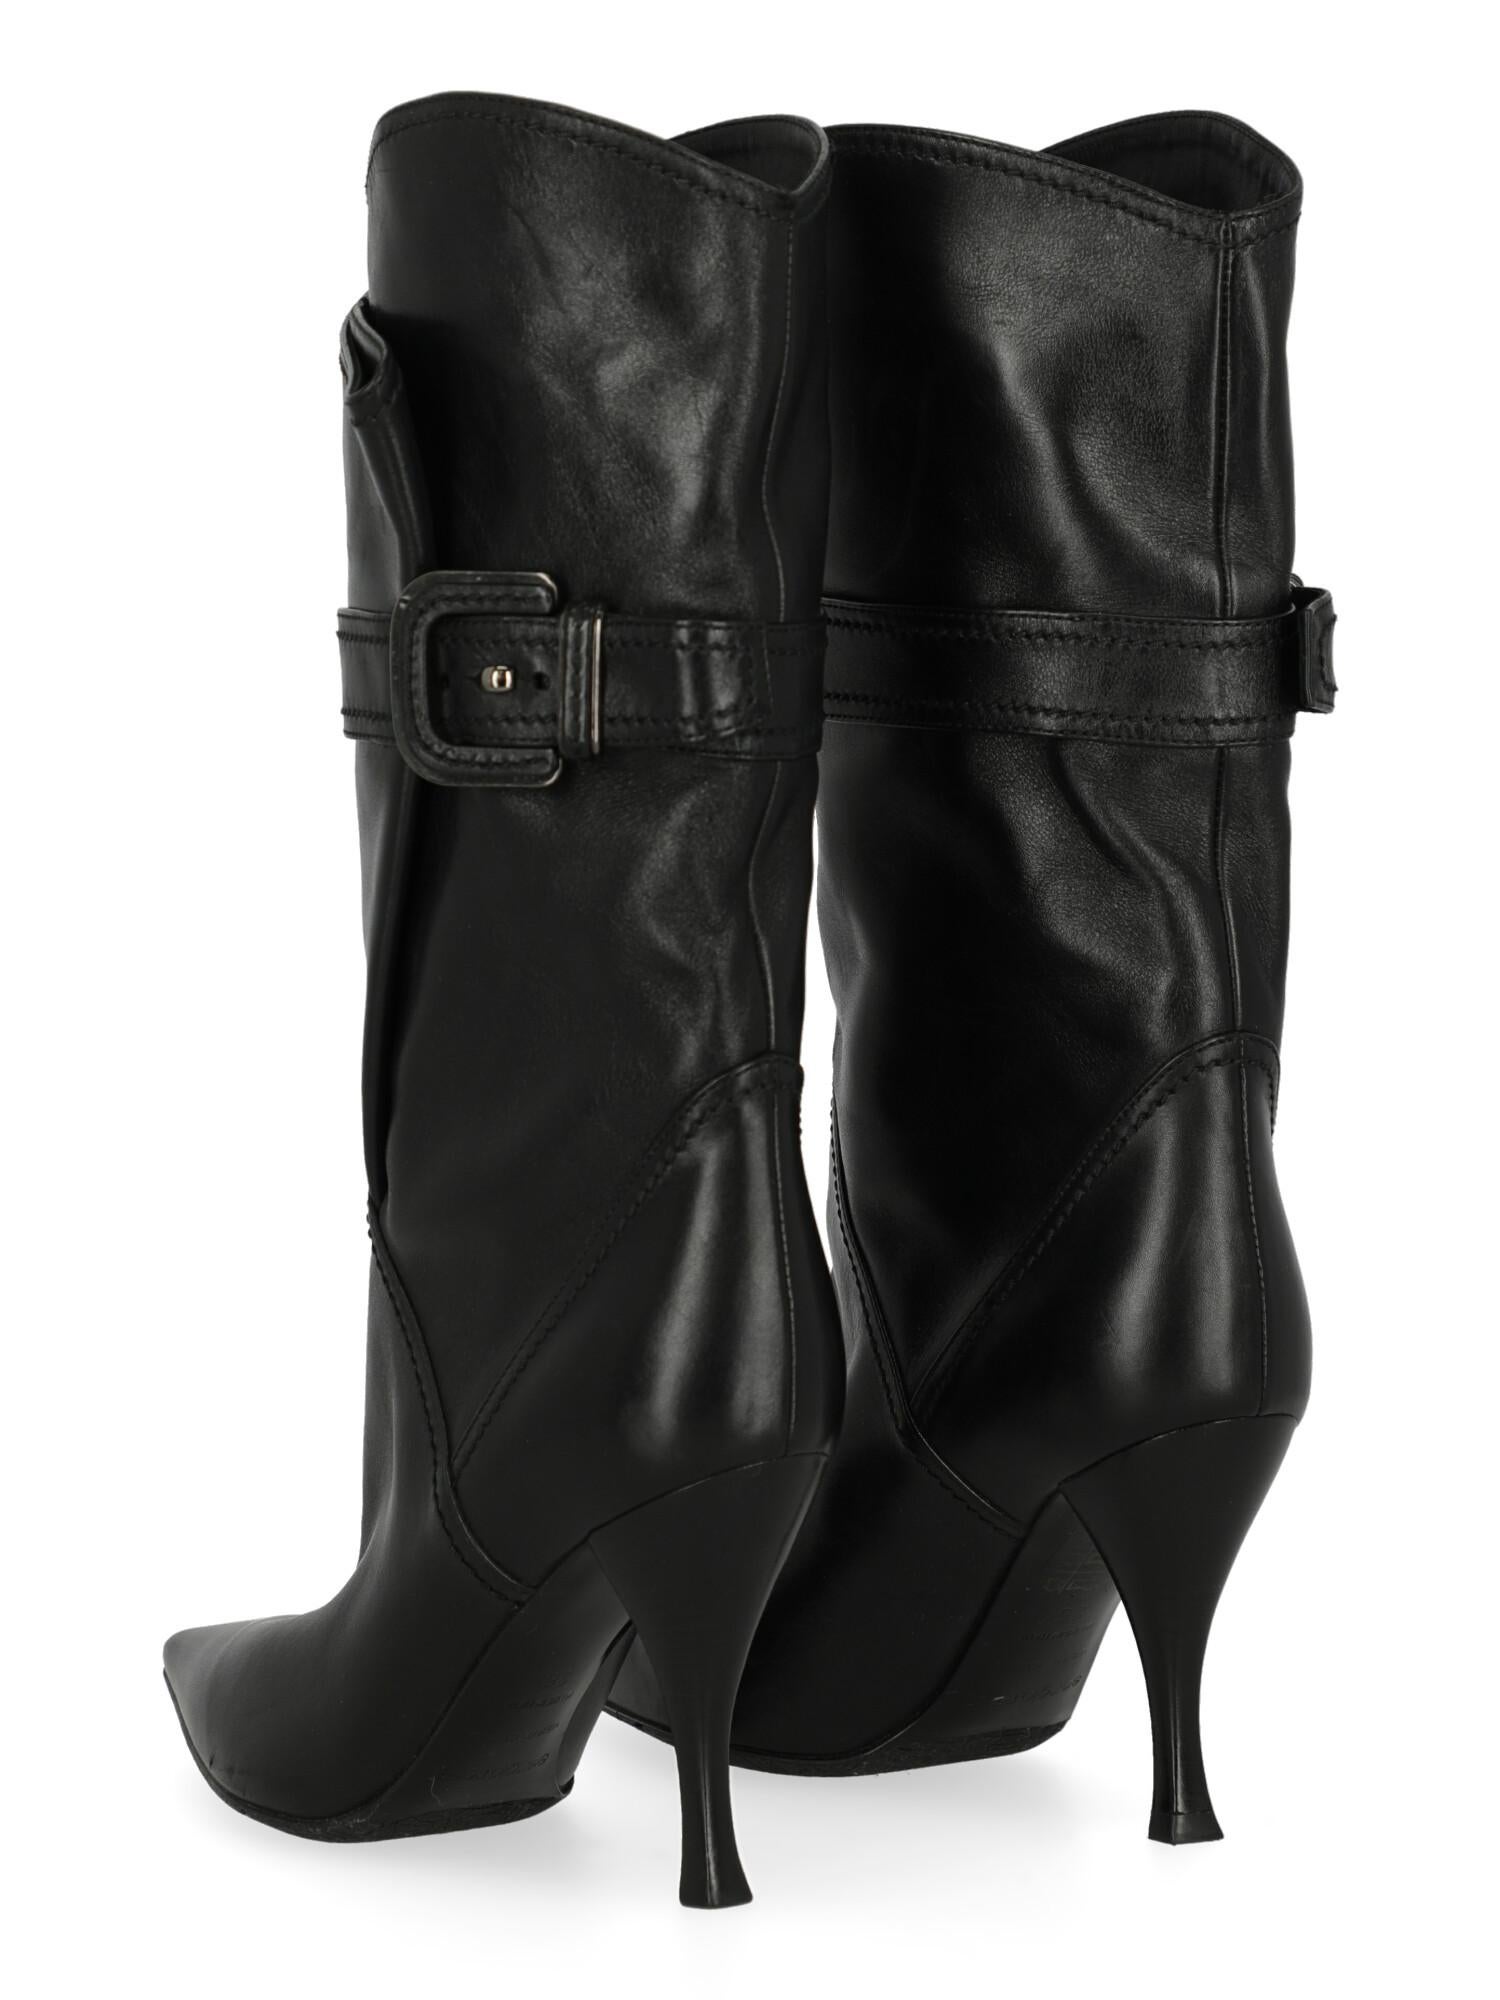 Sergio Rossi  Women   Boots  Black Leather EU 36 In Good Condition For Sale In Milan, IT